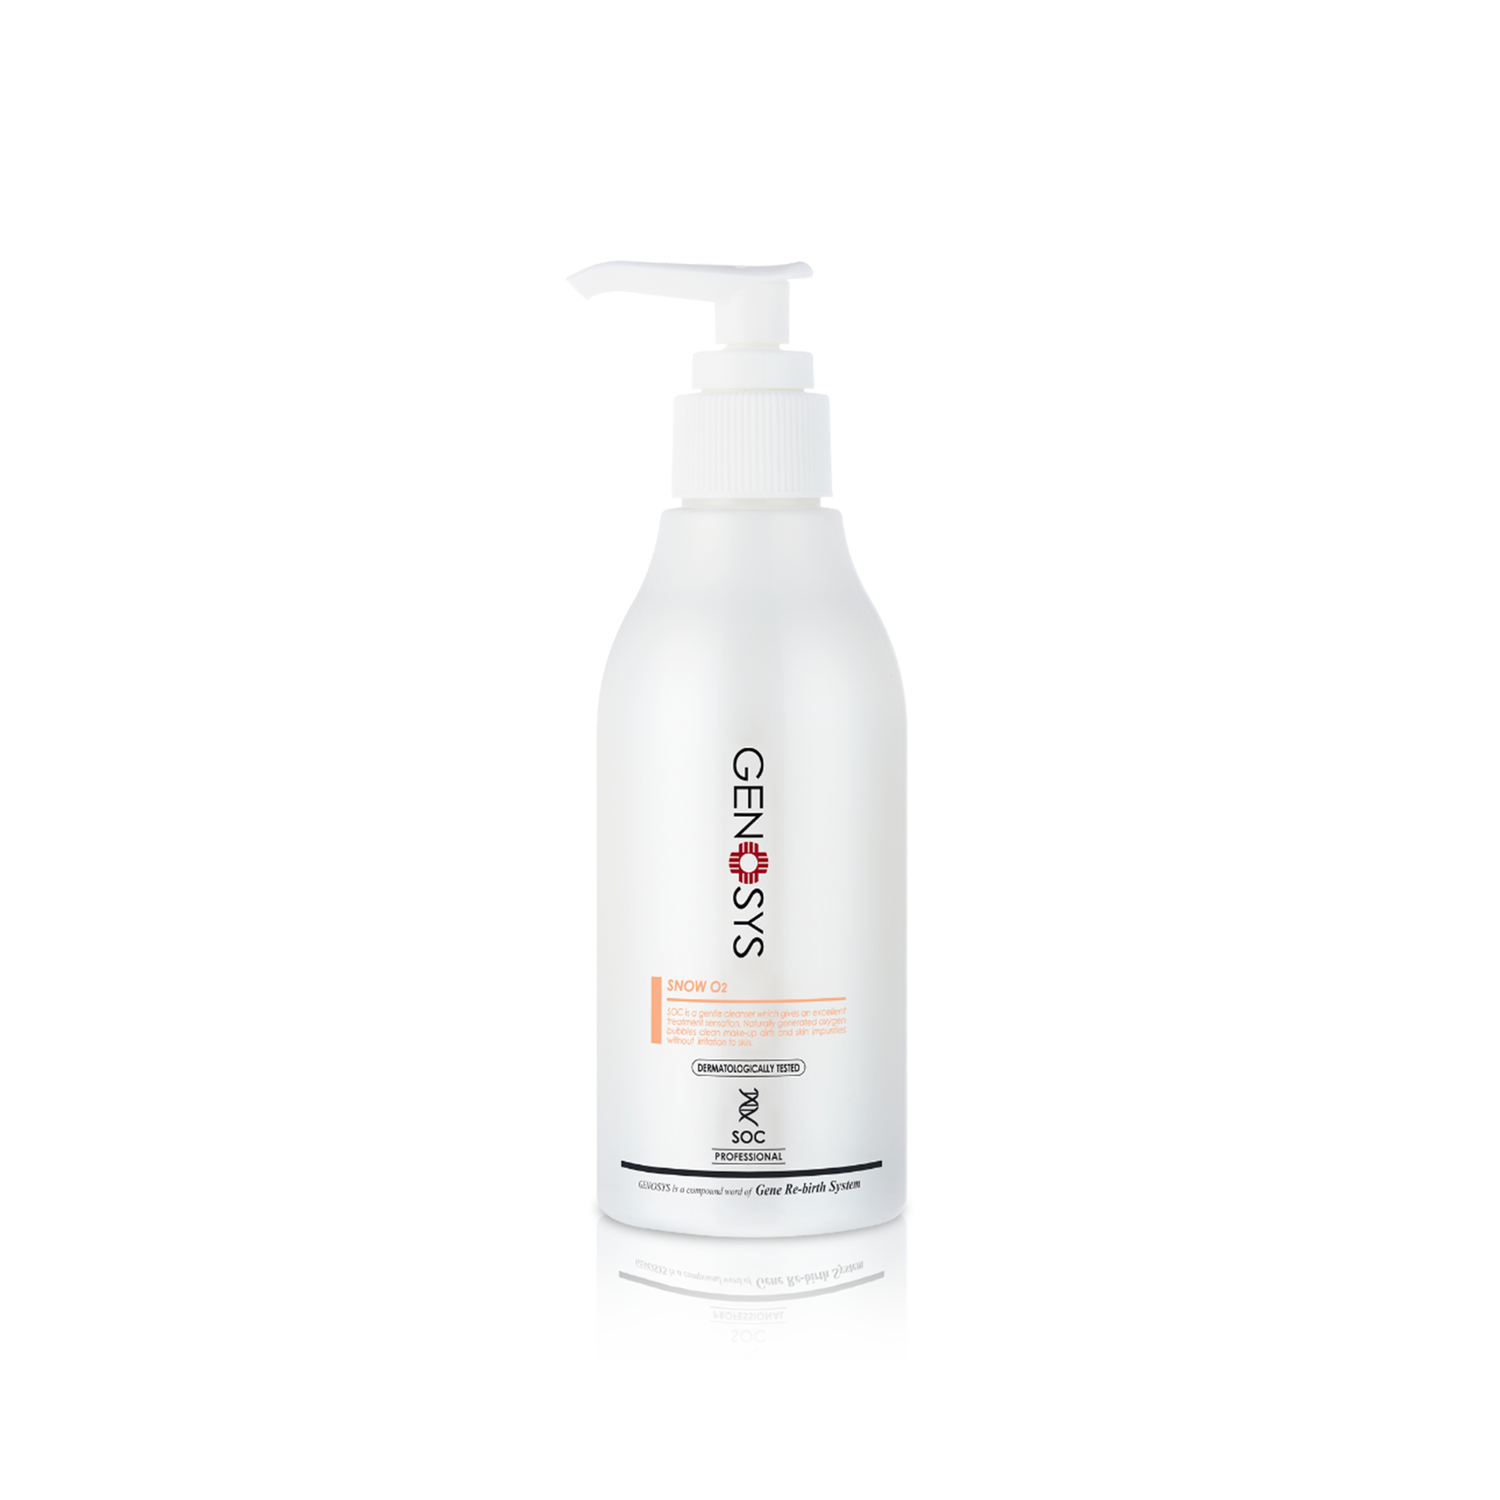 Snow O2 Cleanser